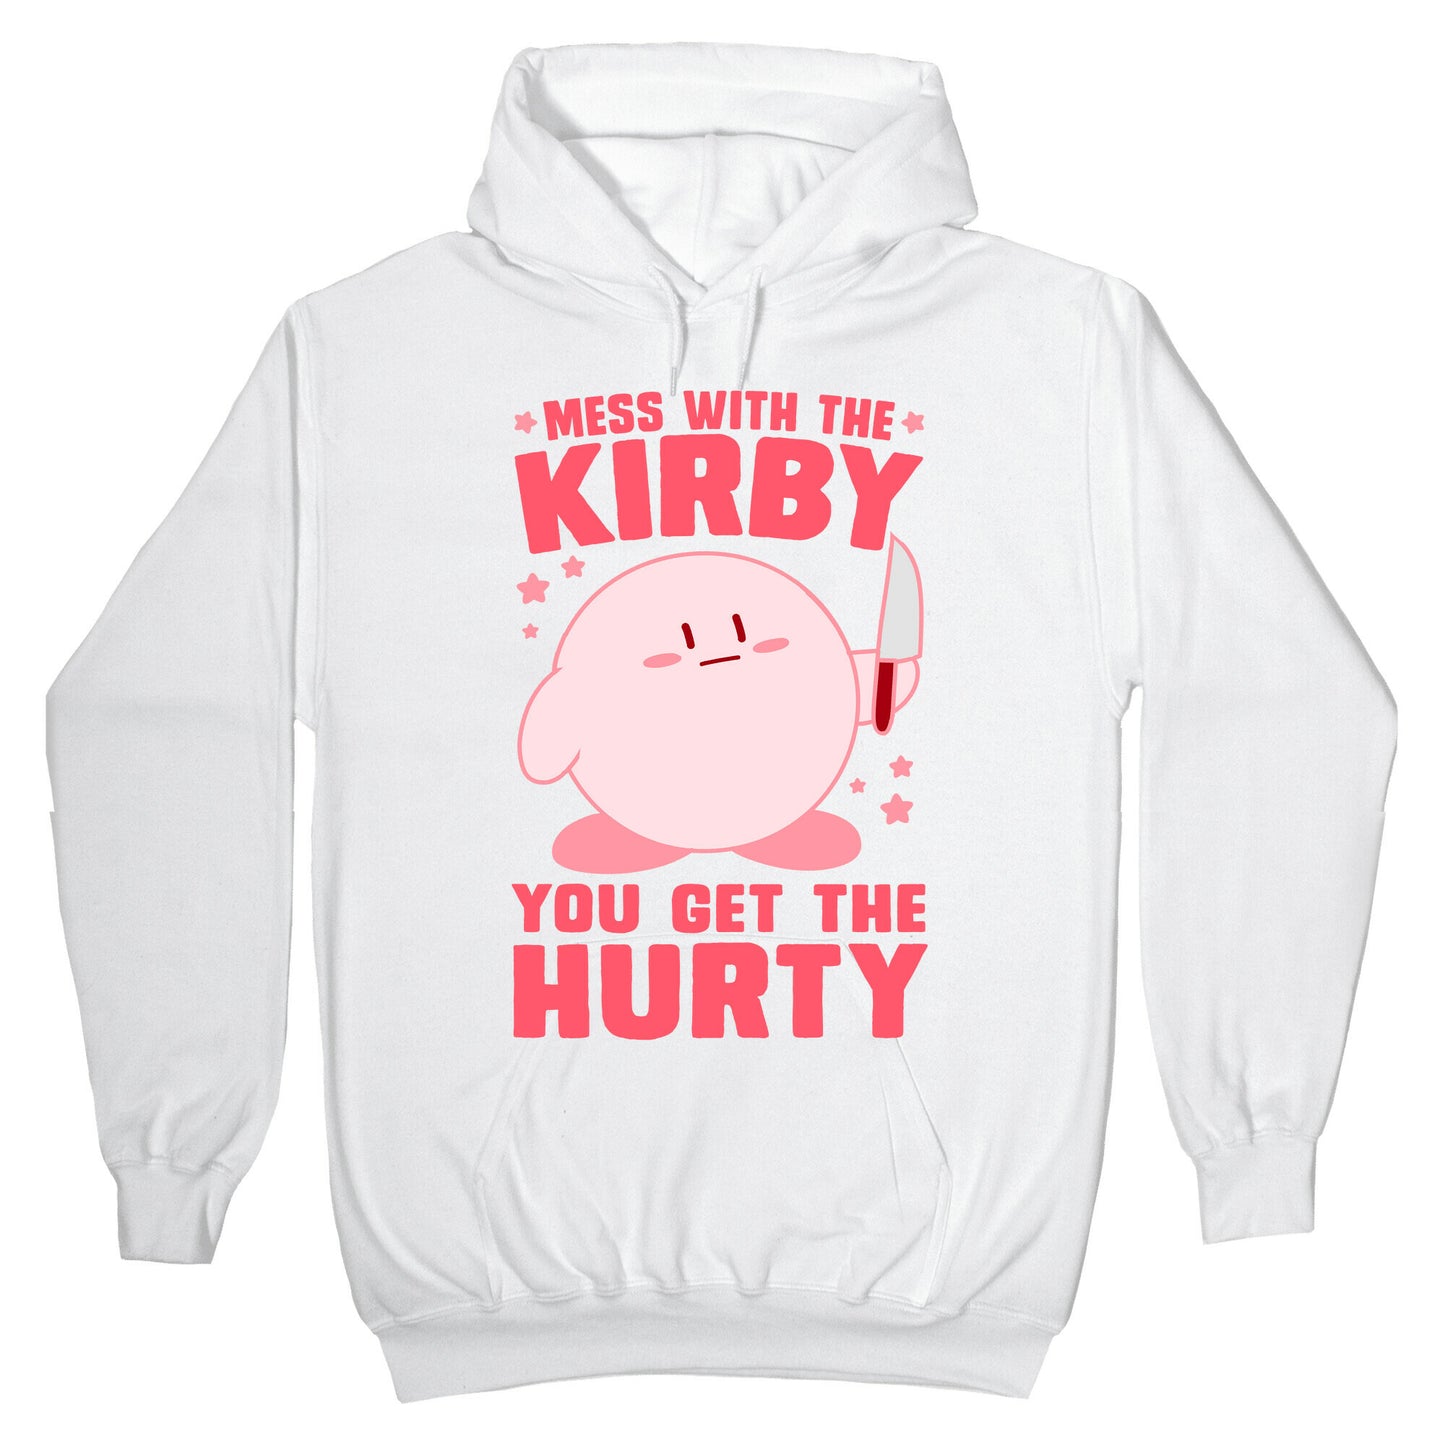 Mess With The Kirby, You Get The Hurty Hoodie